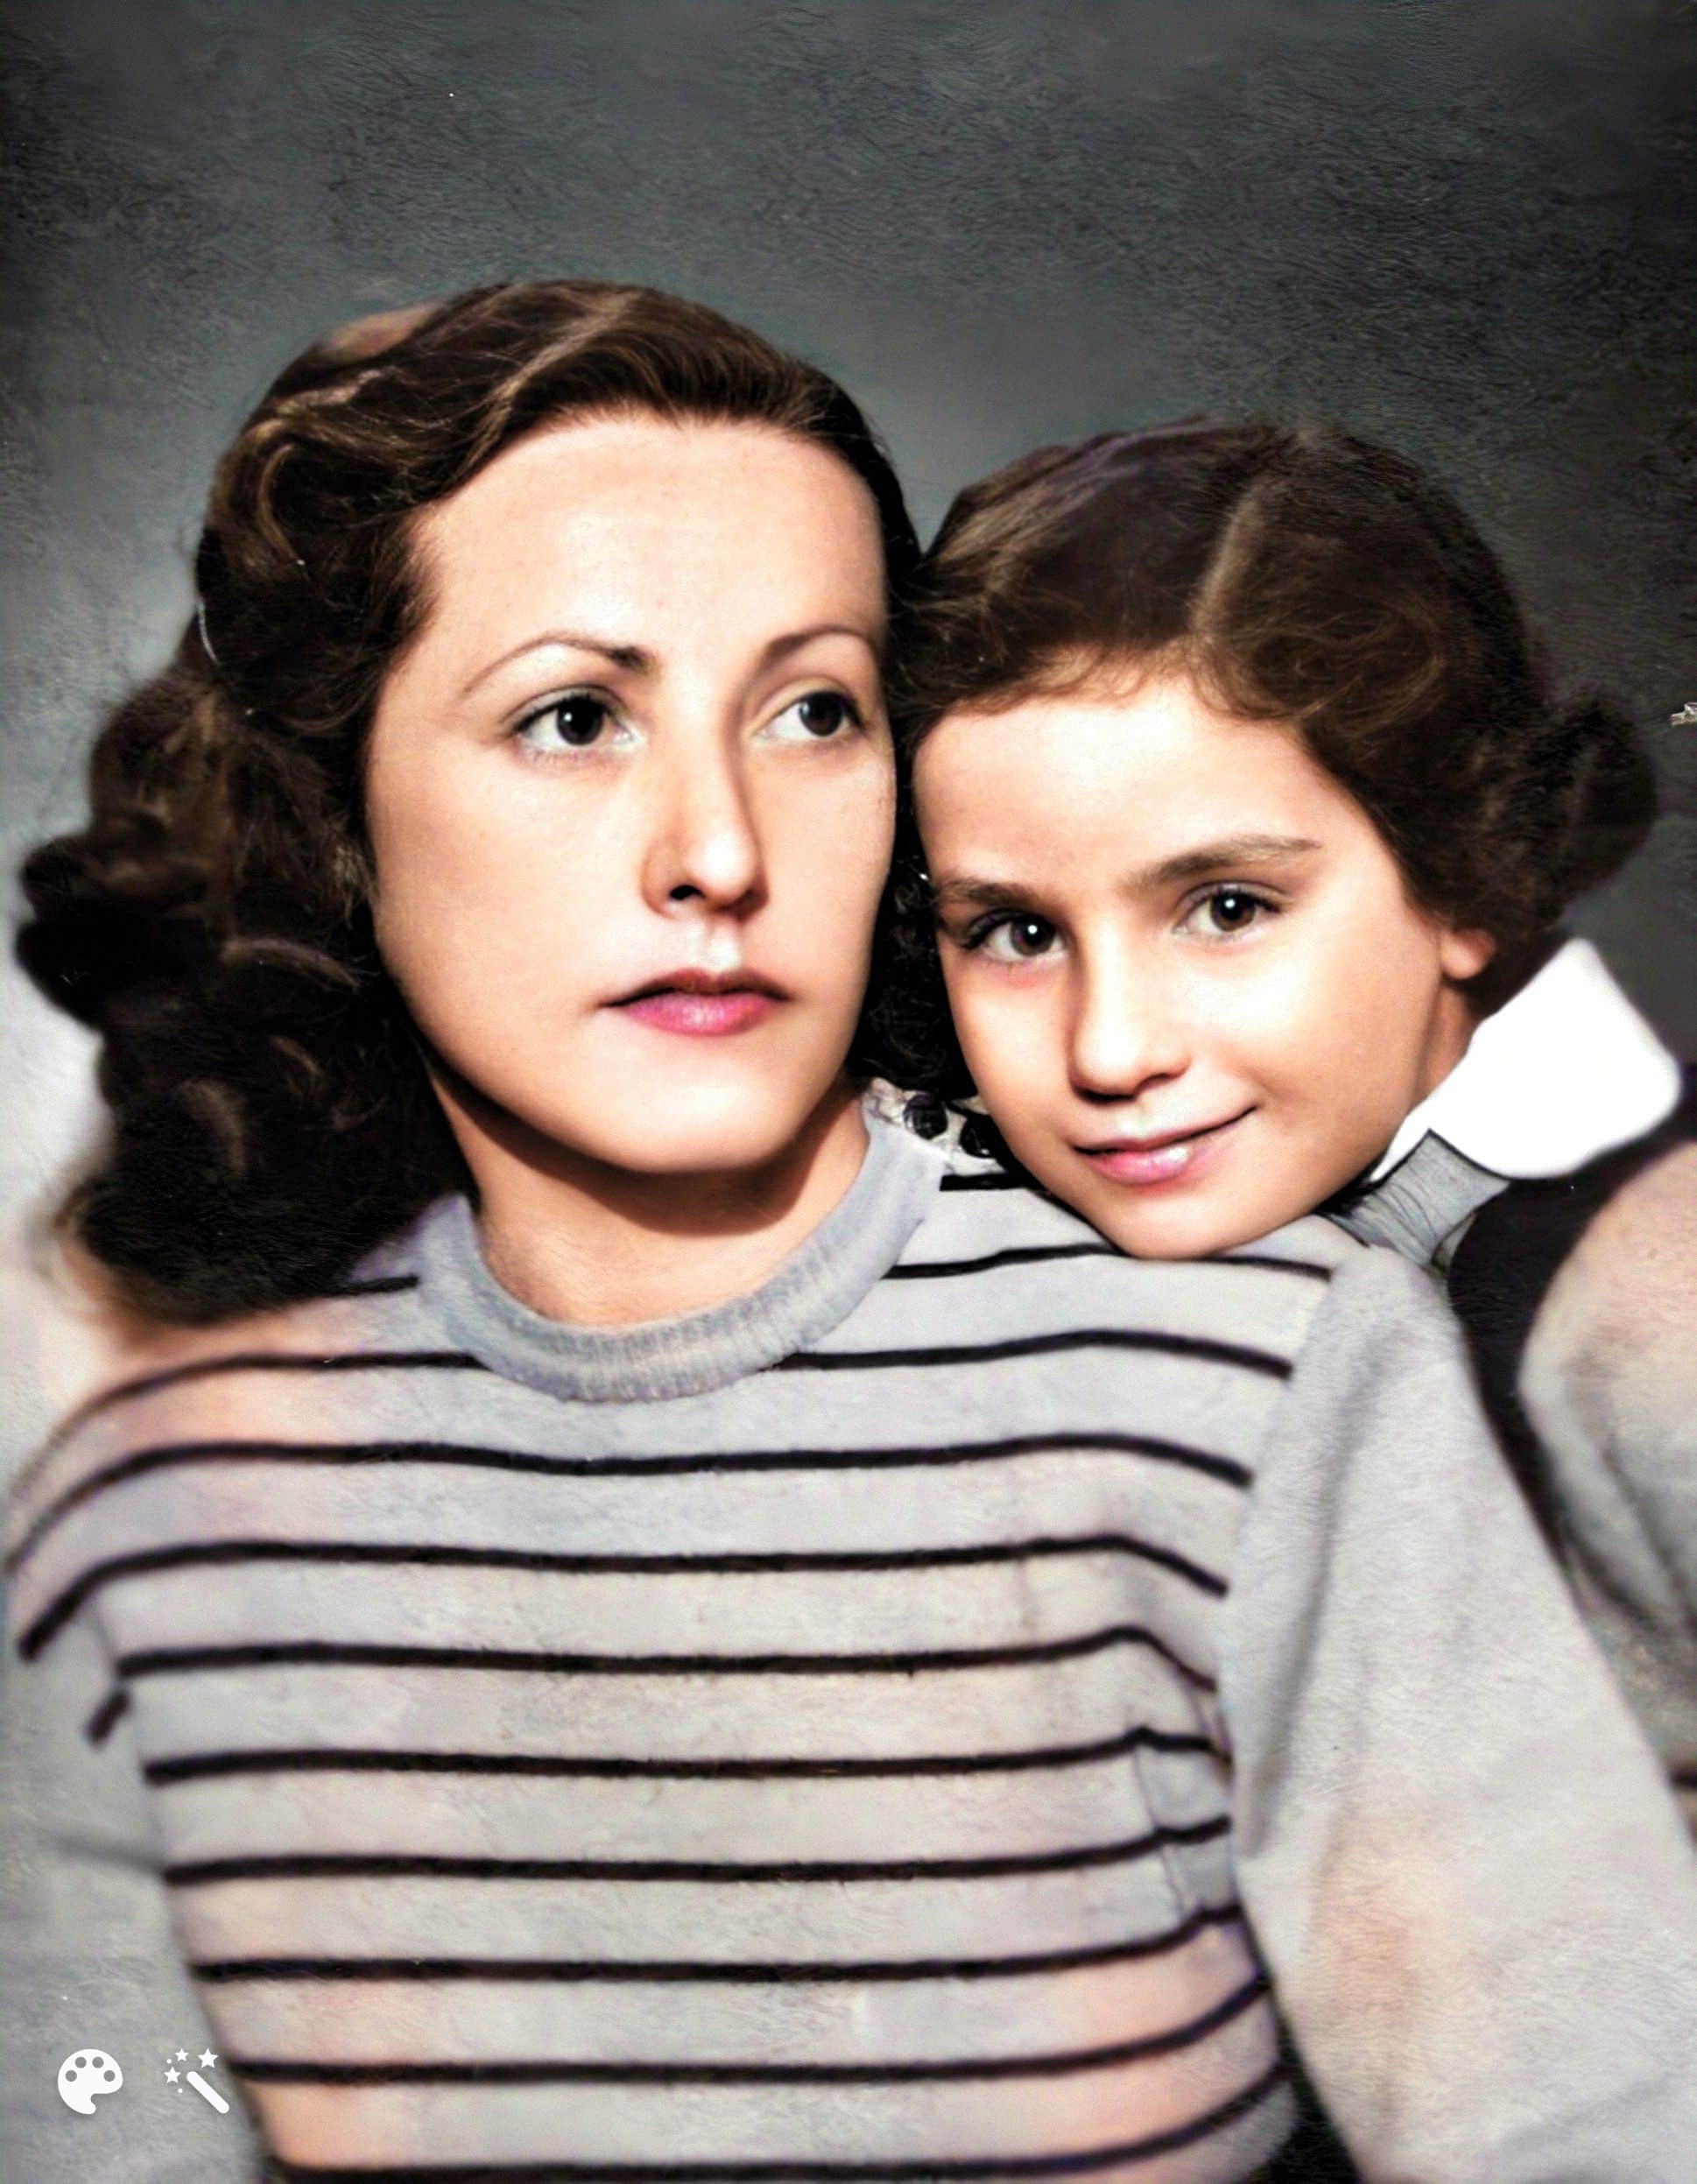 Edith and Alice after the war. Photo enhanced and colorized by MyHeritage